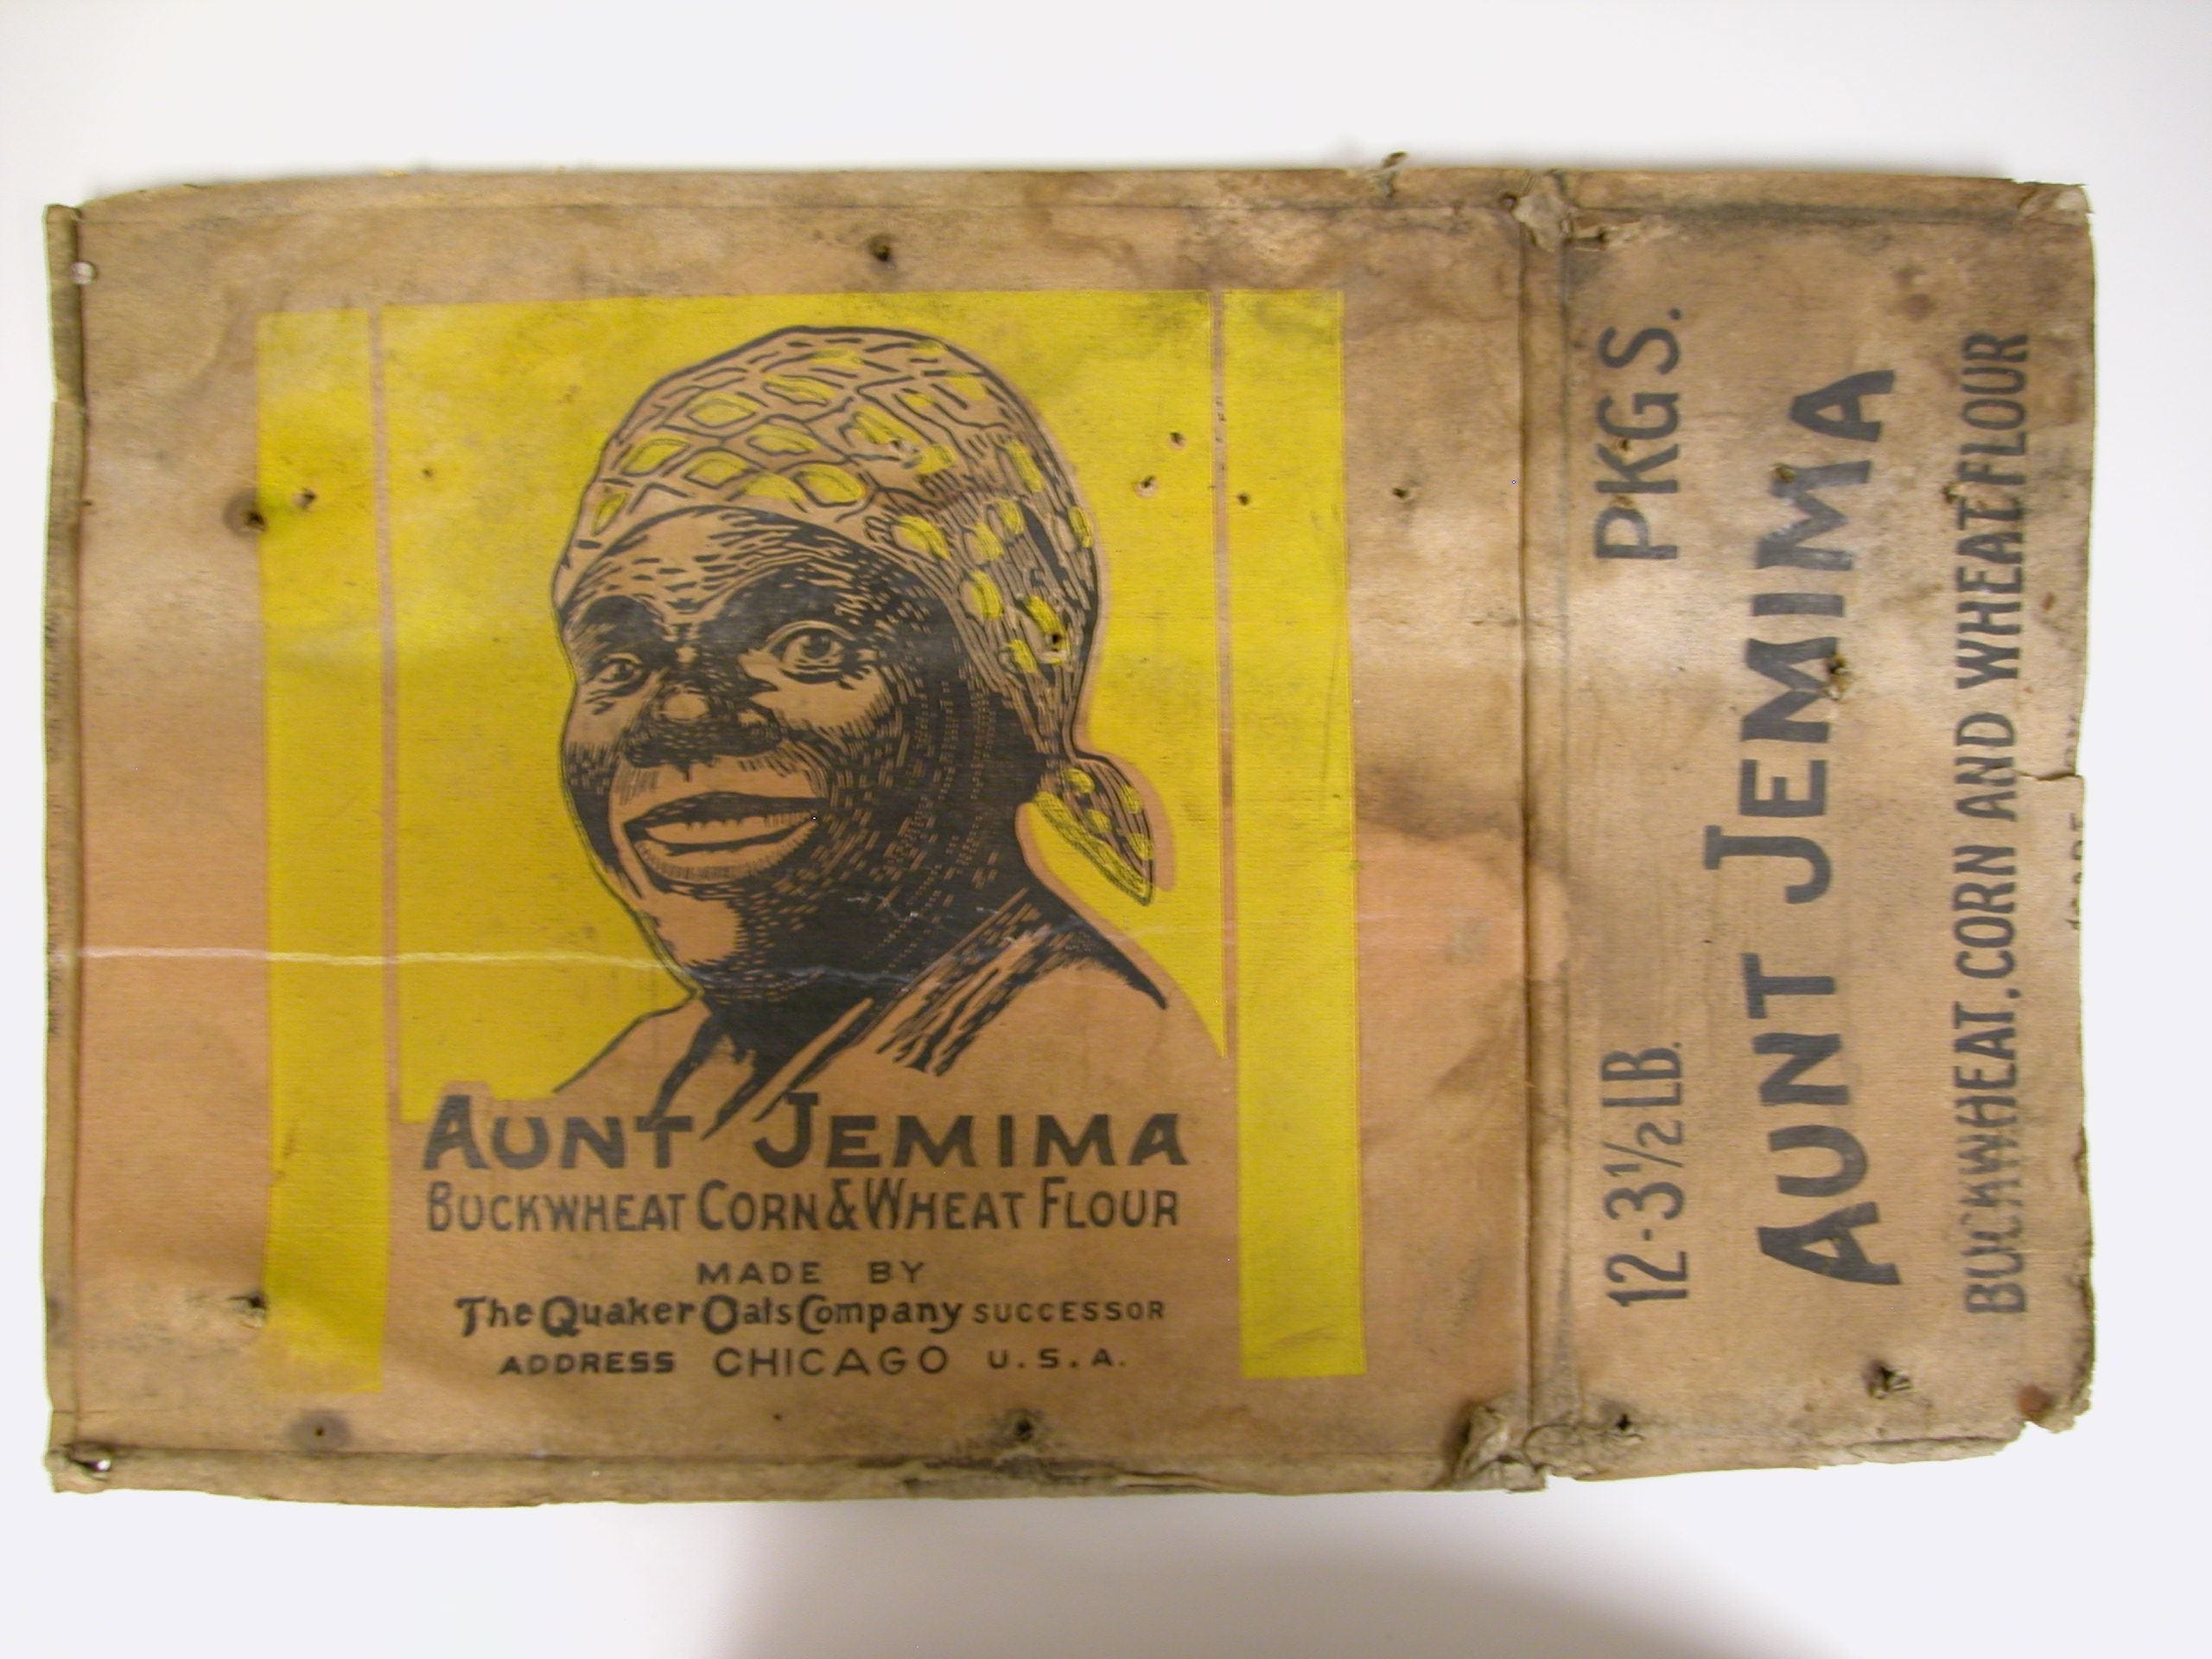 The last 'face' of Aunt Jemima brand